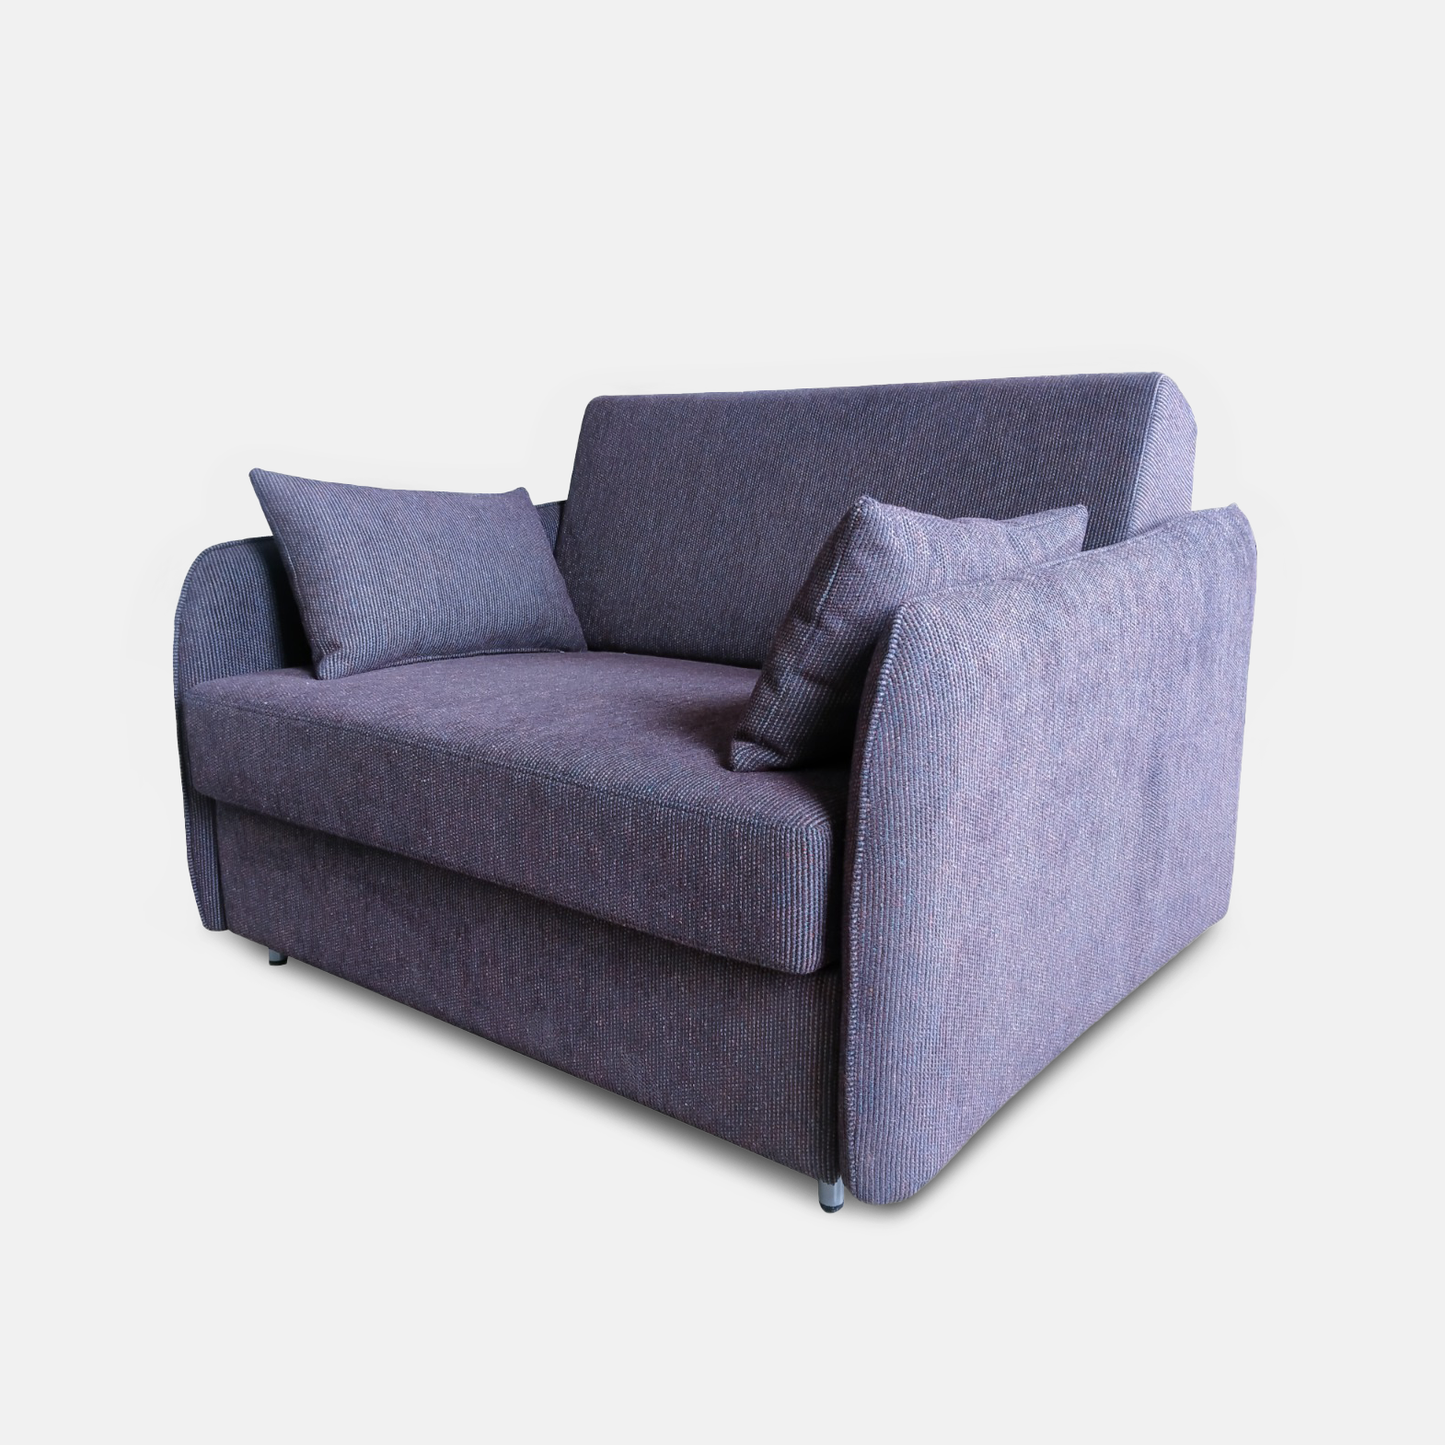 Sofabed Amsterdam Single